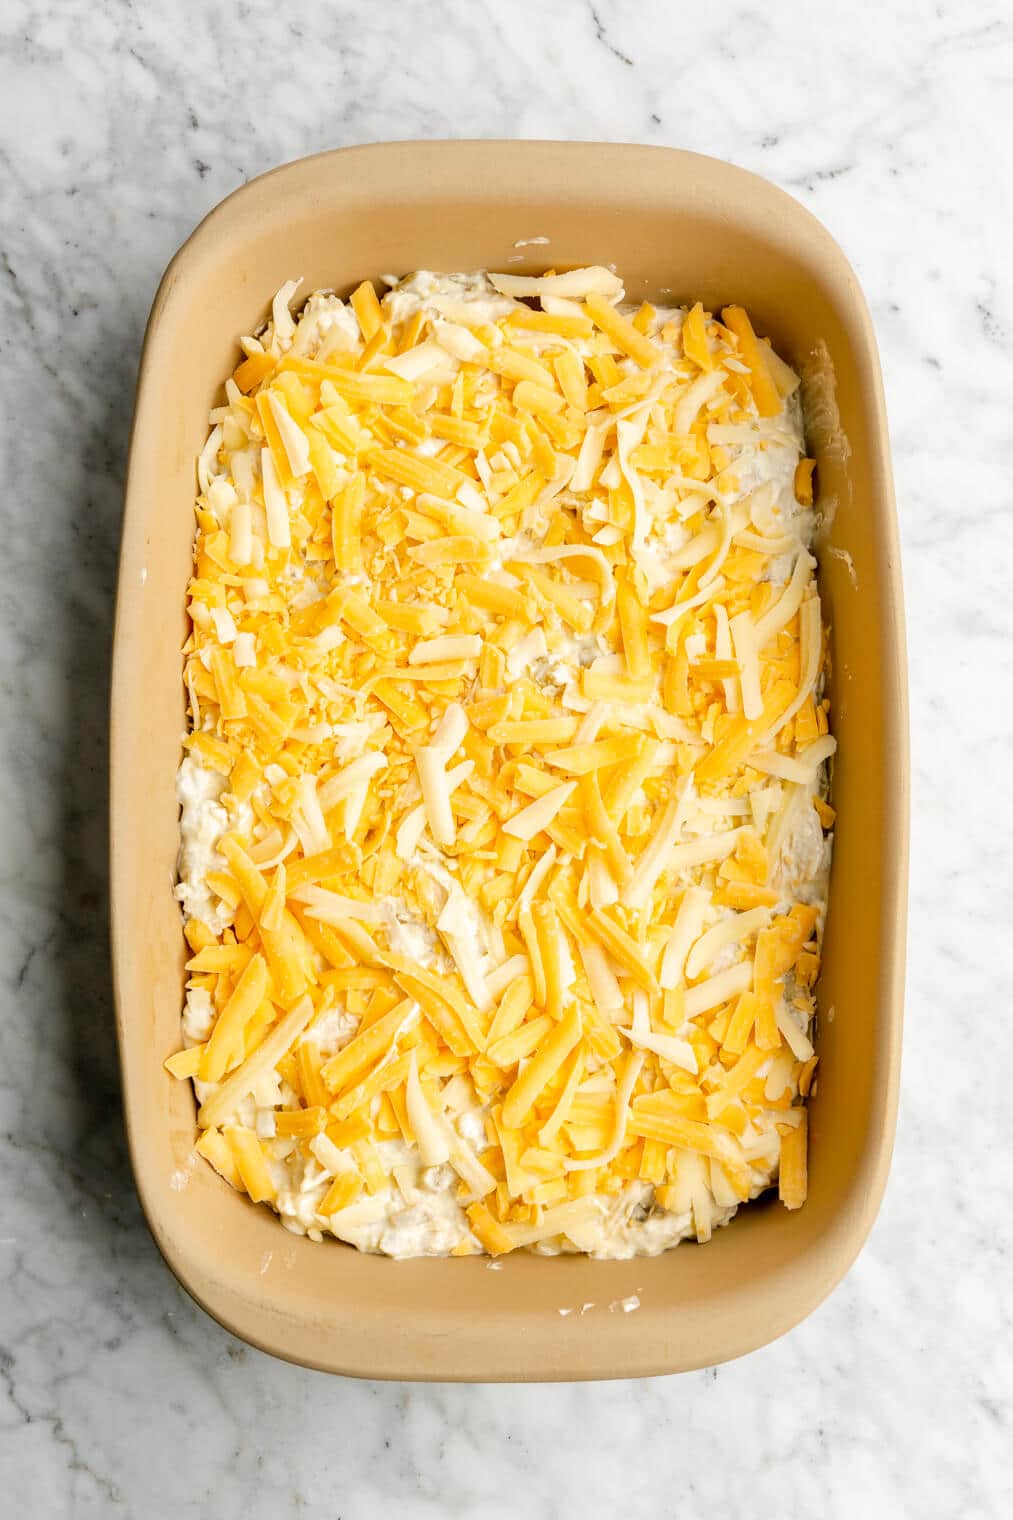 Layered green chili casserole topped with shredded cheese in a casserole dish.